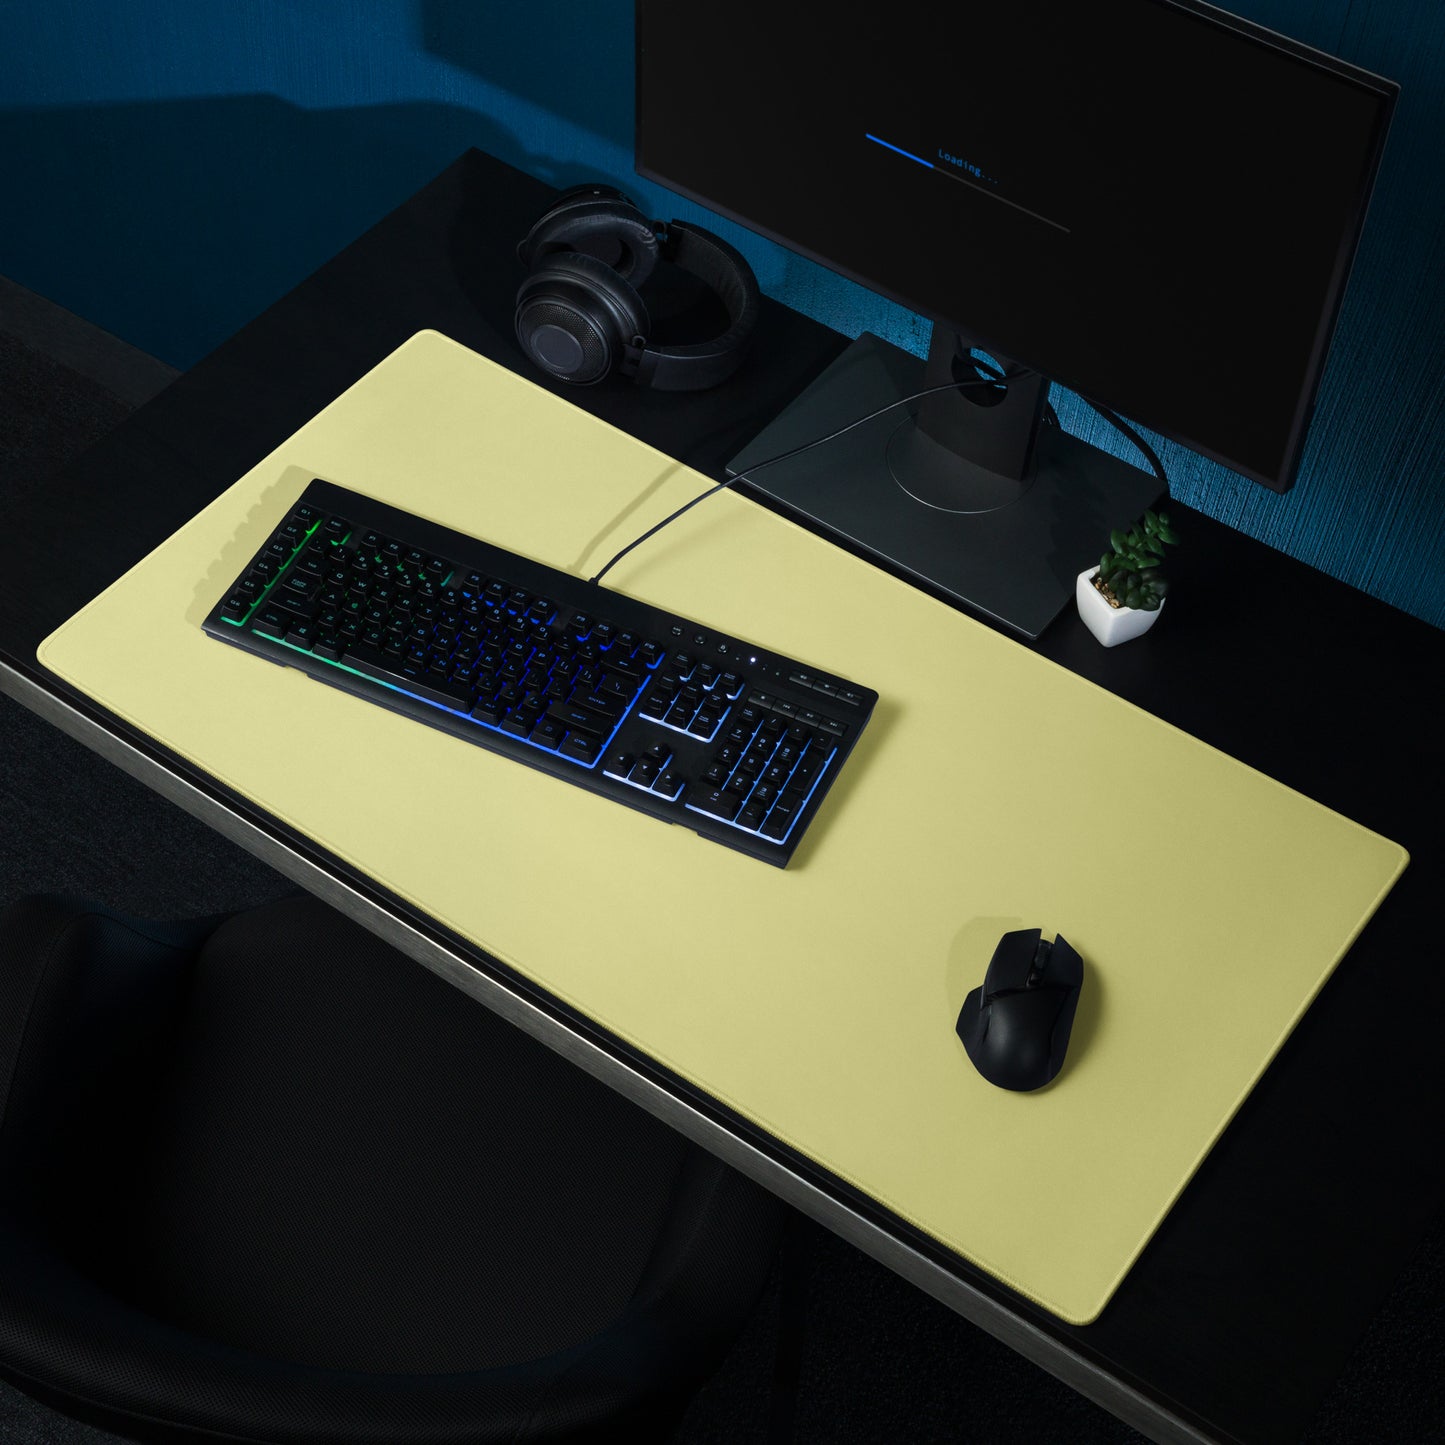 A 36" x 18" yellow gaming desk pad sitting on a black desk with a monitor, keyboard, and mouse.